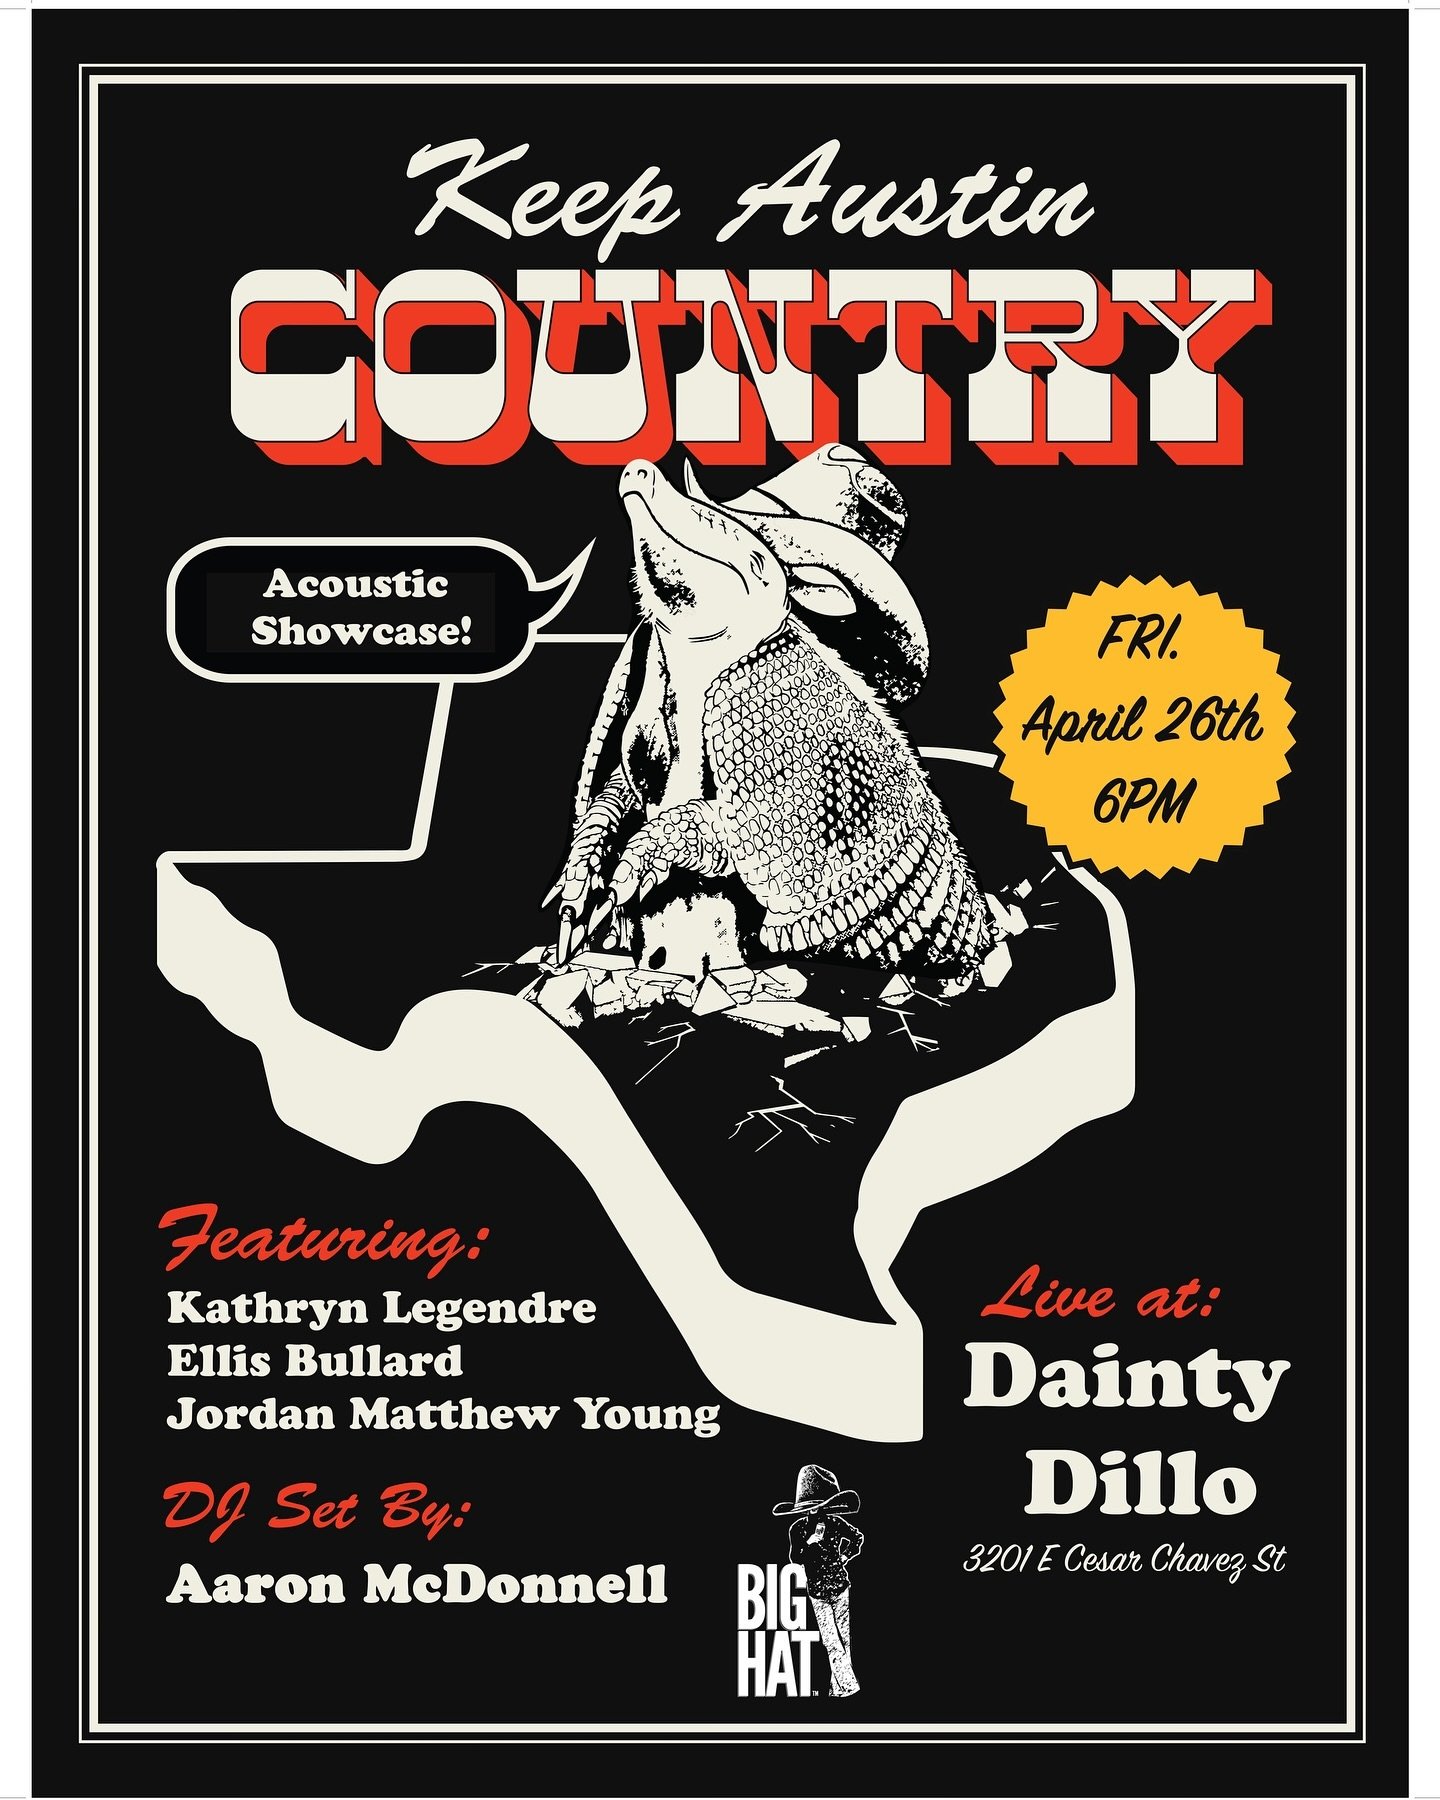 April 26, 2024 - Join us at @daintydillo this evening for a FREE @keepaustincountry showcase, @sponsored by @bighatspirits 🤠I&rsquo;ll be pickin&rsquo; with @bluebonnet_broussard from 6-6:45pm!